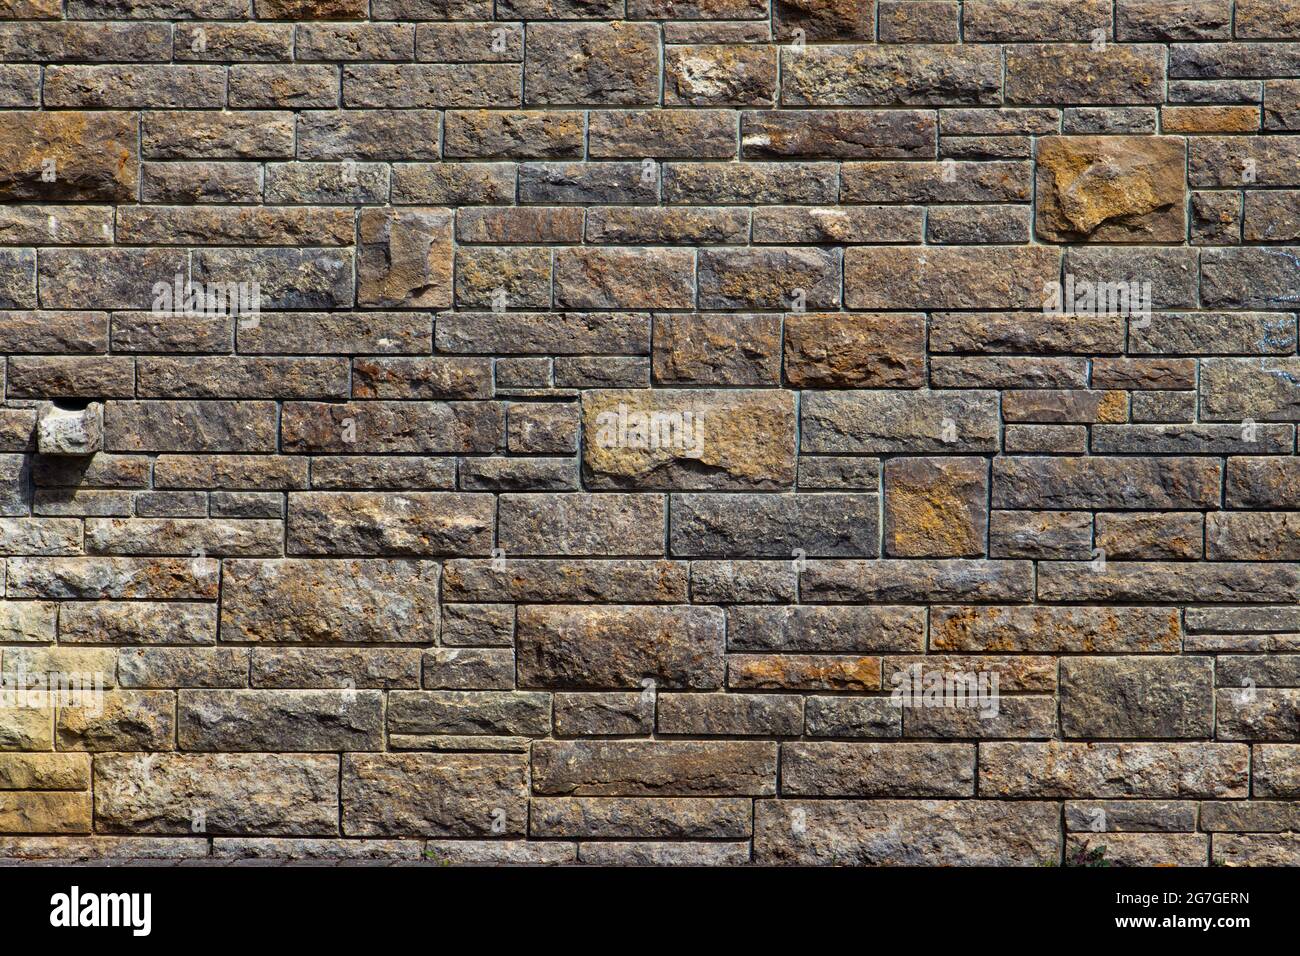 Natural brown and beige stone brick wall background texture Stock Photo